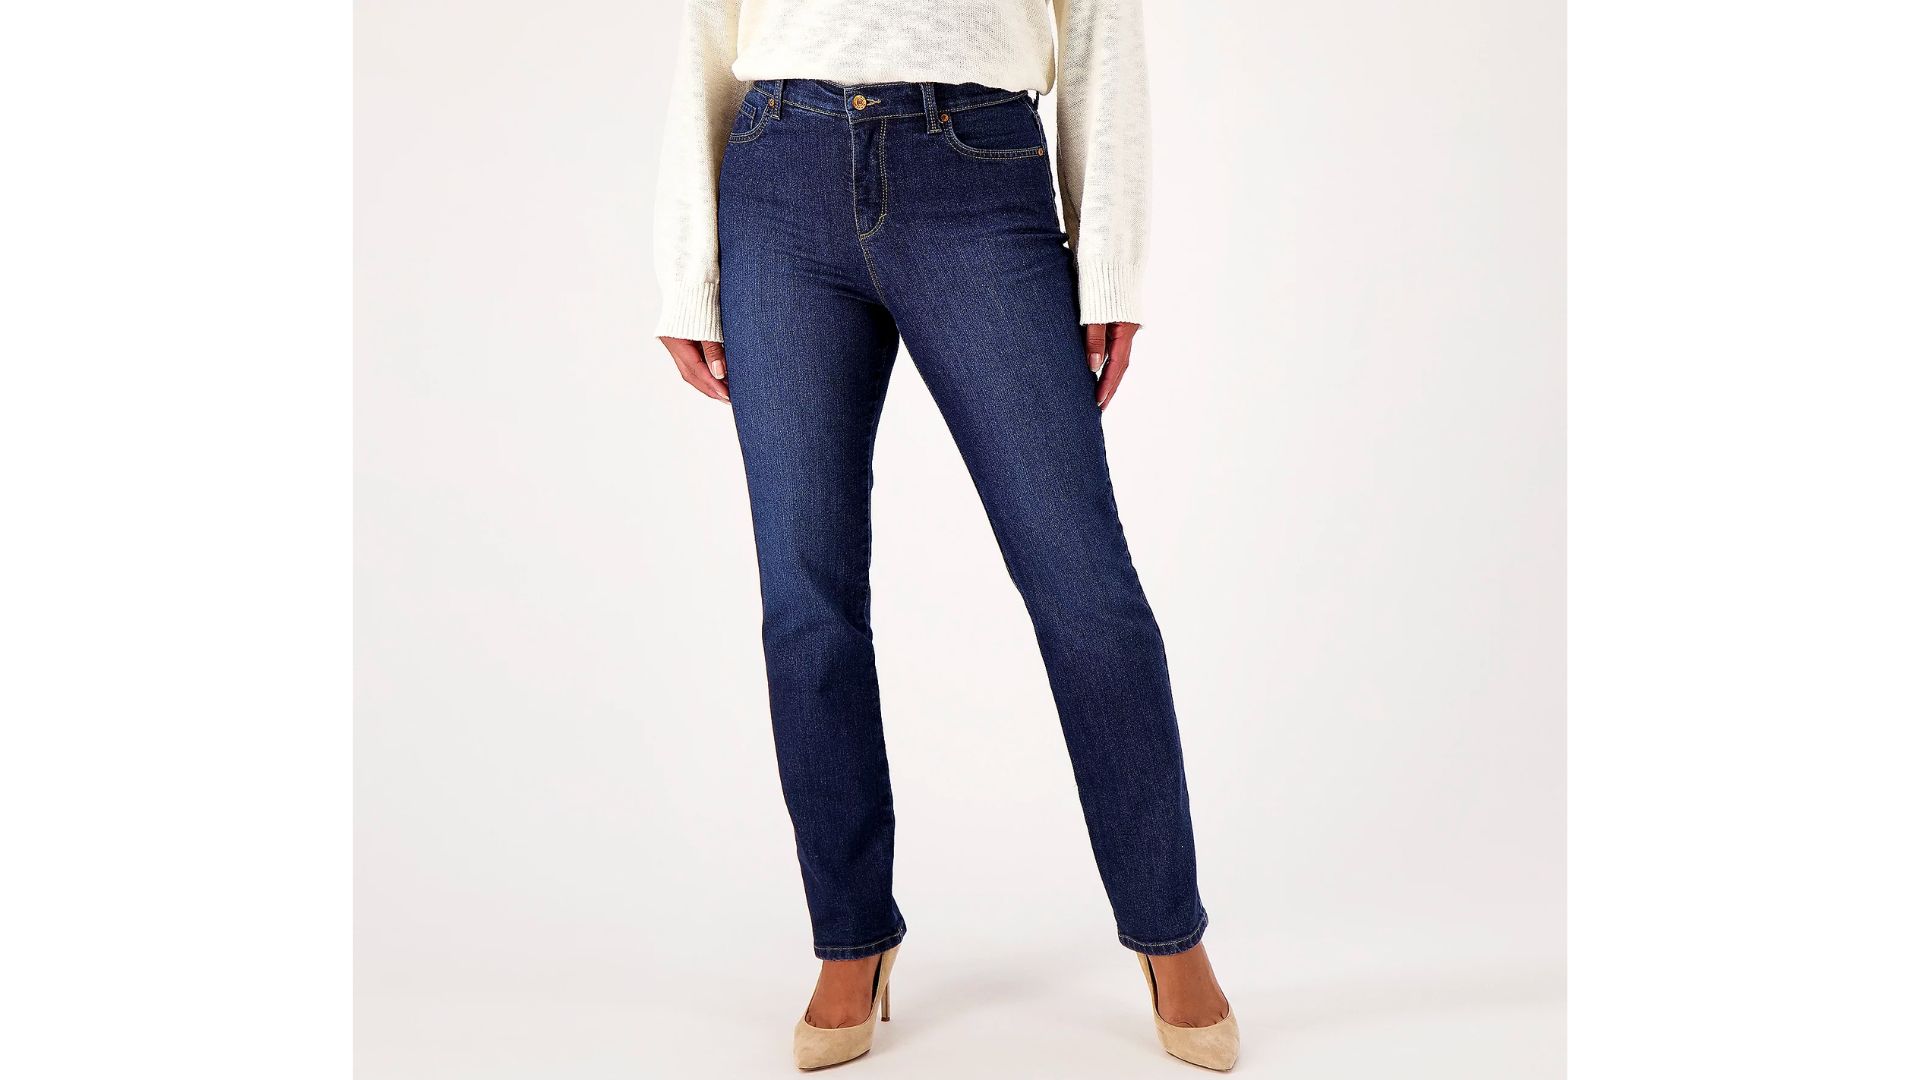 33 Best Jeans for Women Over 50 in 2023 - Woman's World